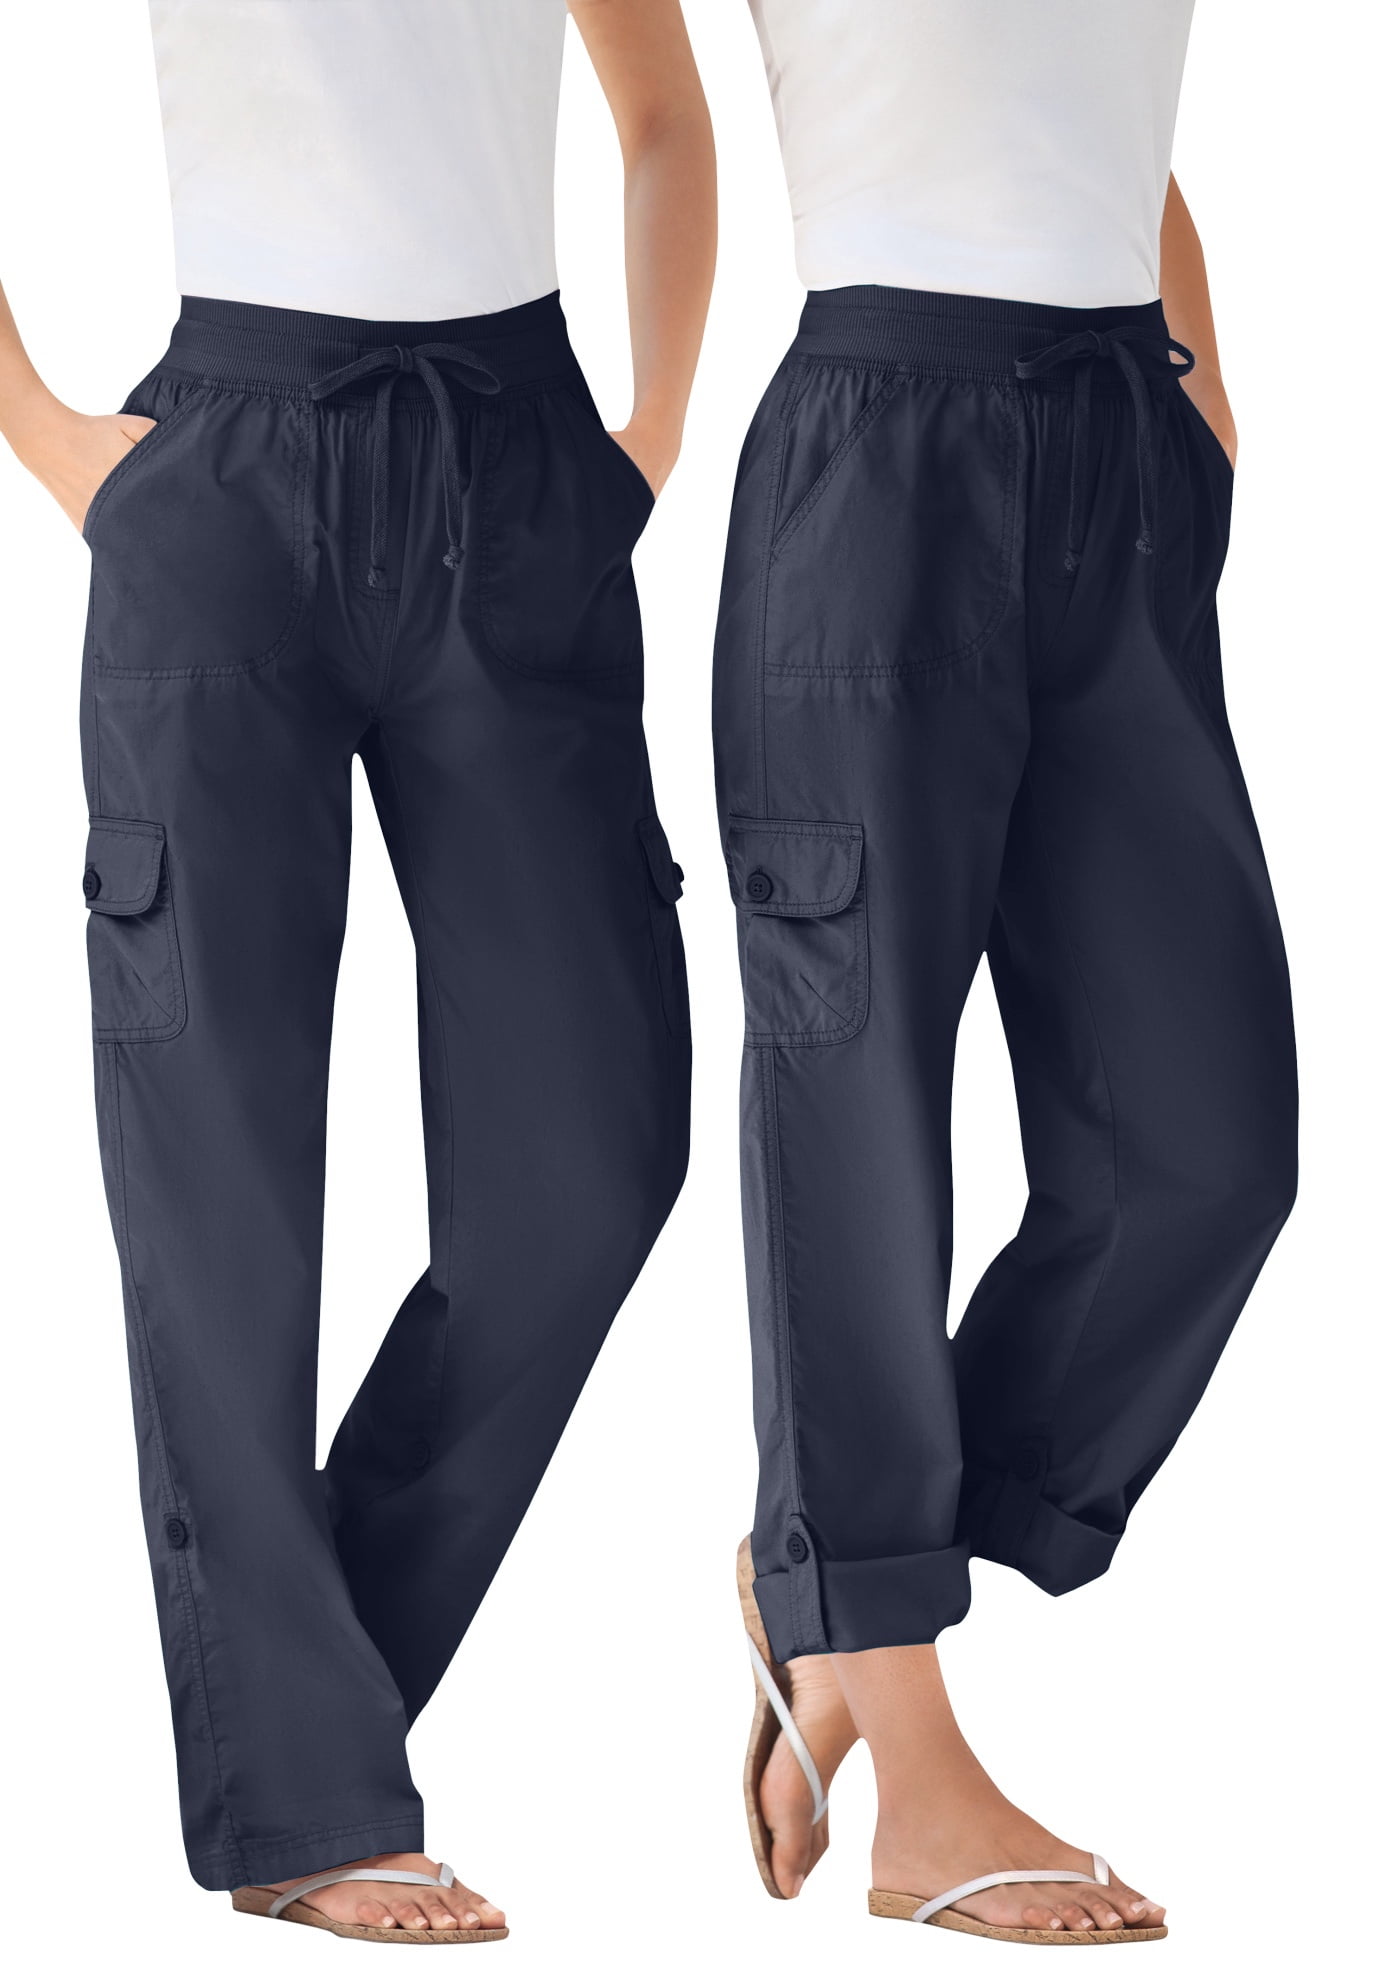 Womens Lightweight Pants Plus Size Women Capri Pants Cargo Pants for Women  with Pockets Really Cheap Stuff Under 50 Cents My Shopping Cart Today Deals  10 and Under Items Gift for Woman Zipper Black at  Women's Clothing  store